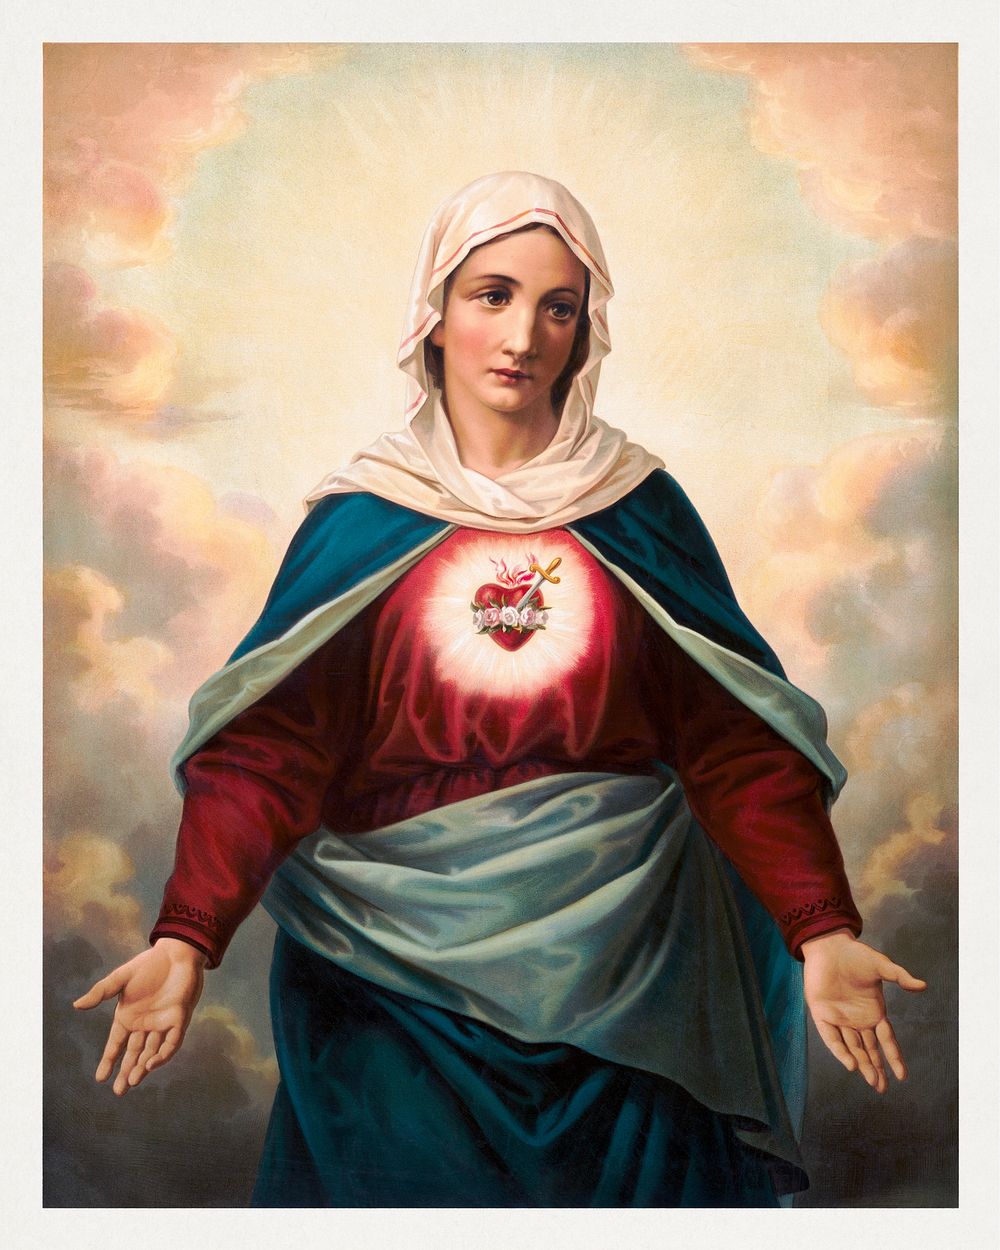 [The Virgin Mary with heart emblem on chest] (1890), vintage religious illustration. Original public domain image from the…